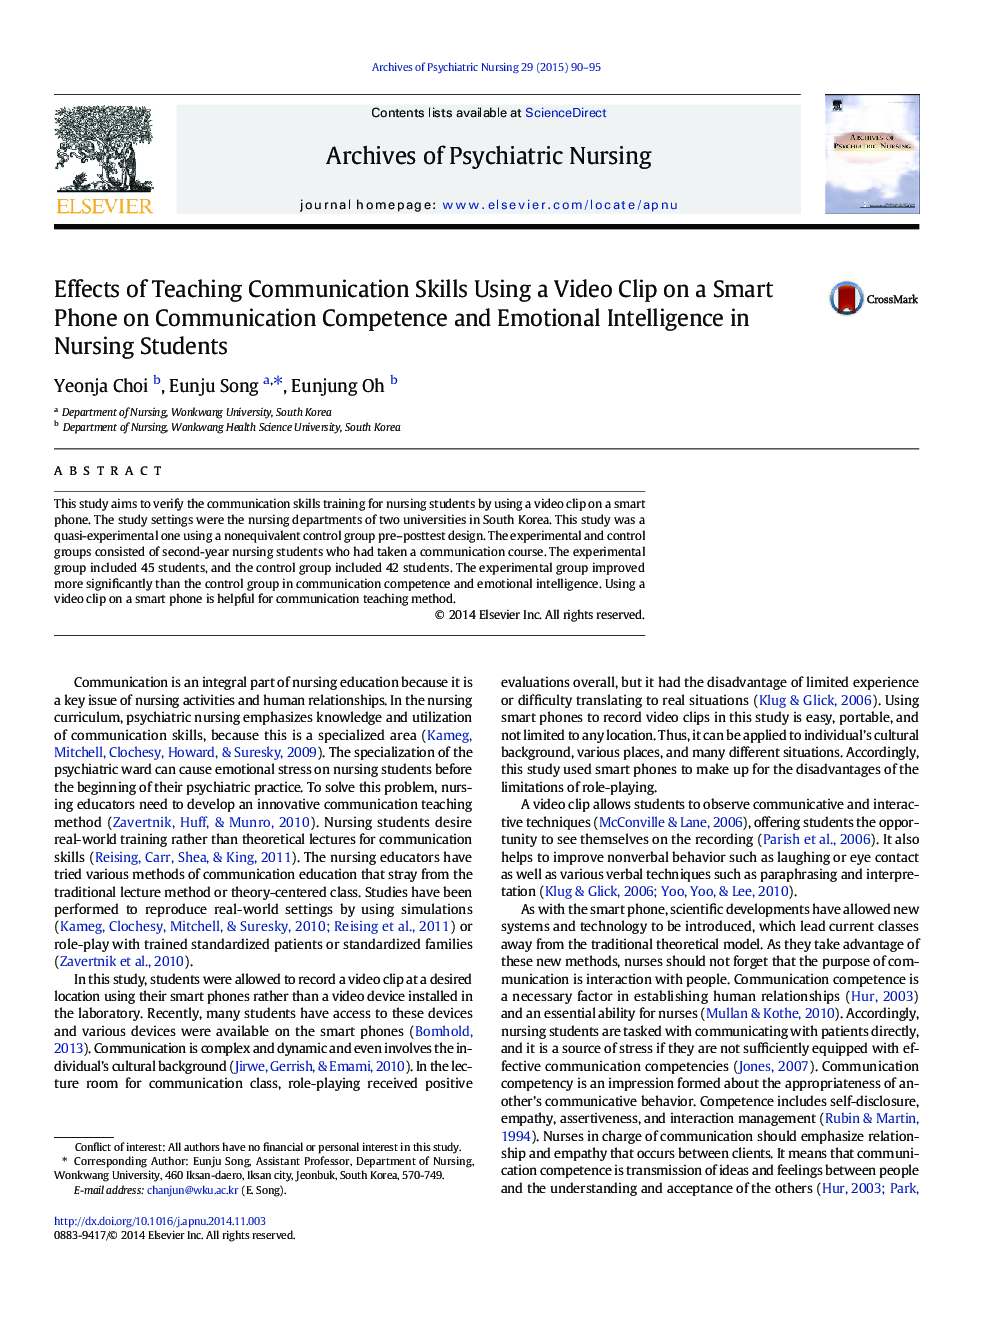 Effects of Teaching Communication Skills Using a Video Clip on a Smart Phone on Communication Competence and Emotional Intelligence in Nursing Students 